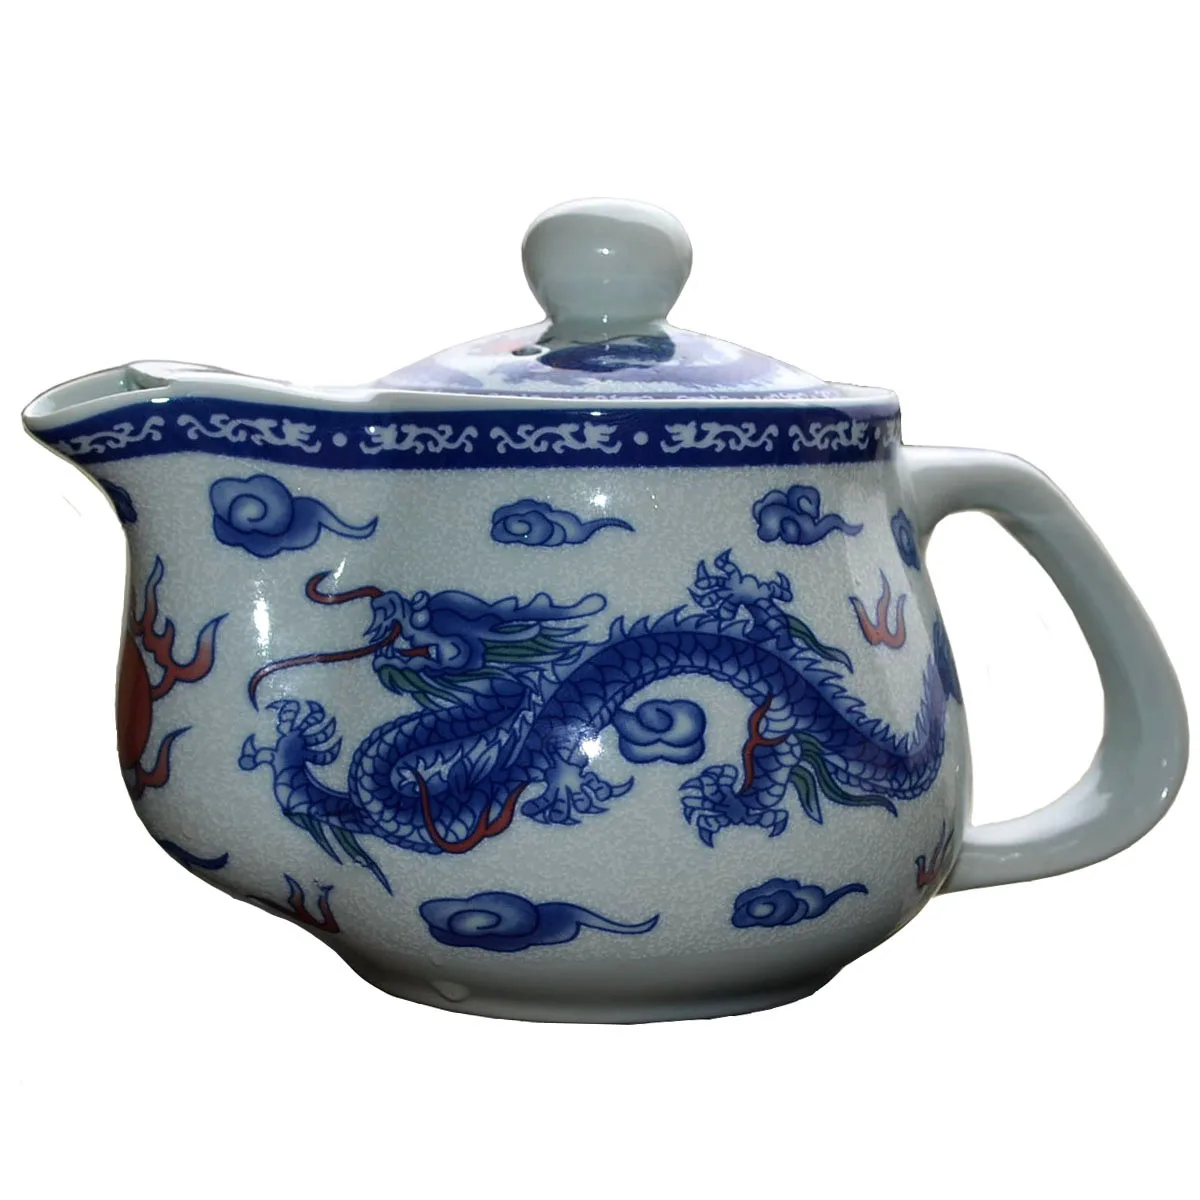 

Teapot 500ml bule white porcelain Chinese dragons phoenixe pot stainless steel strainer infusion Flowers tea puer kettle ceramic